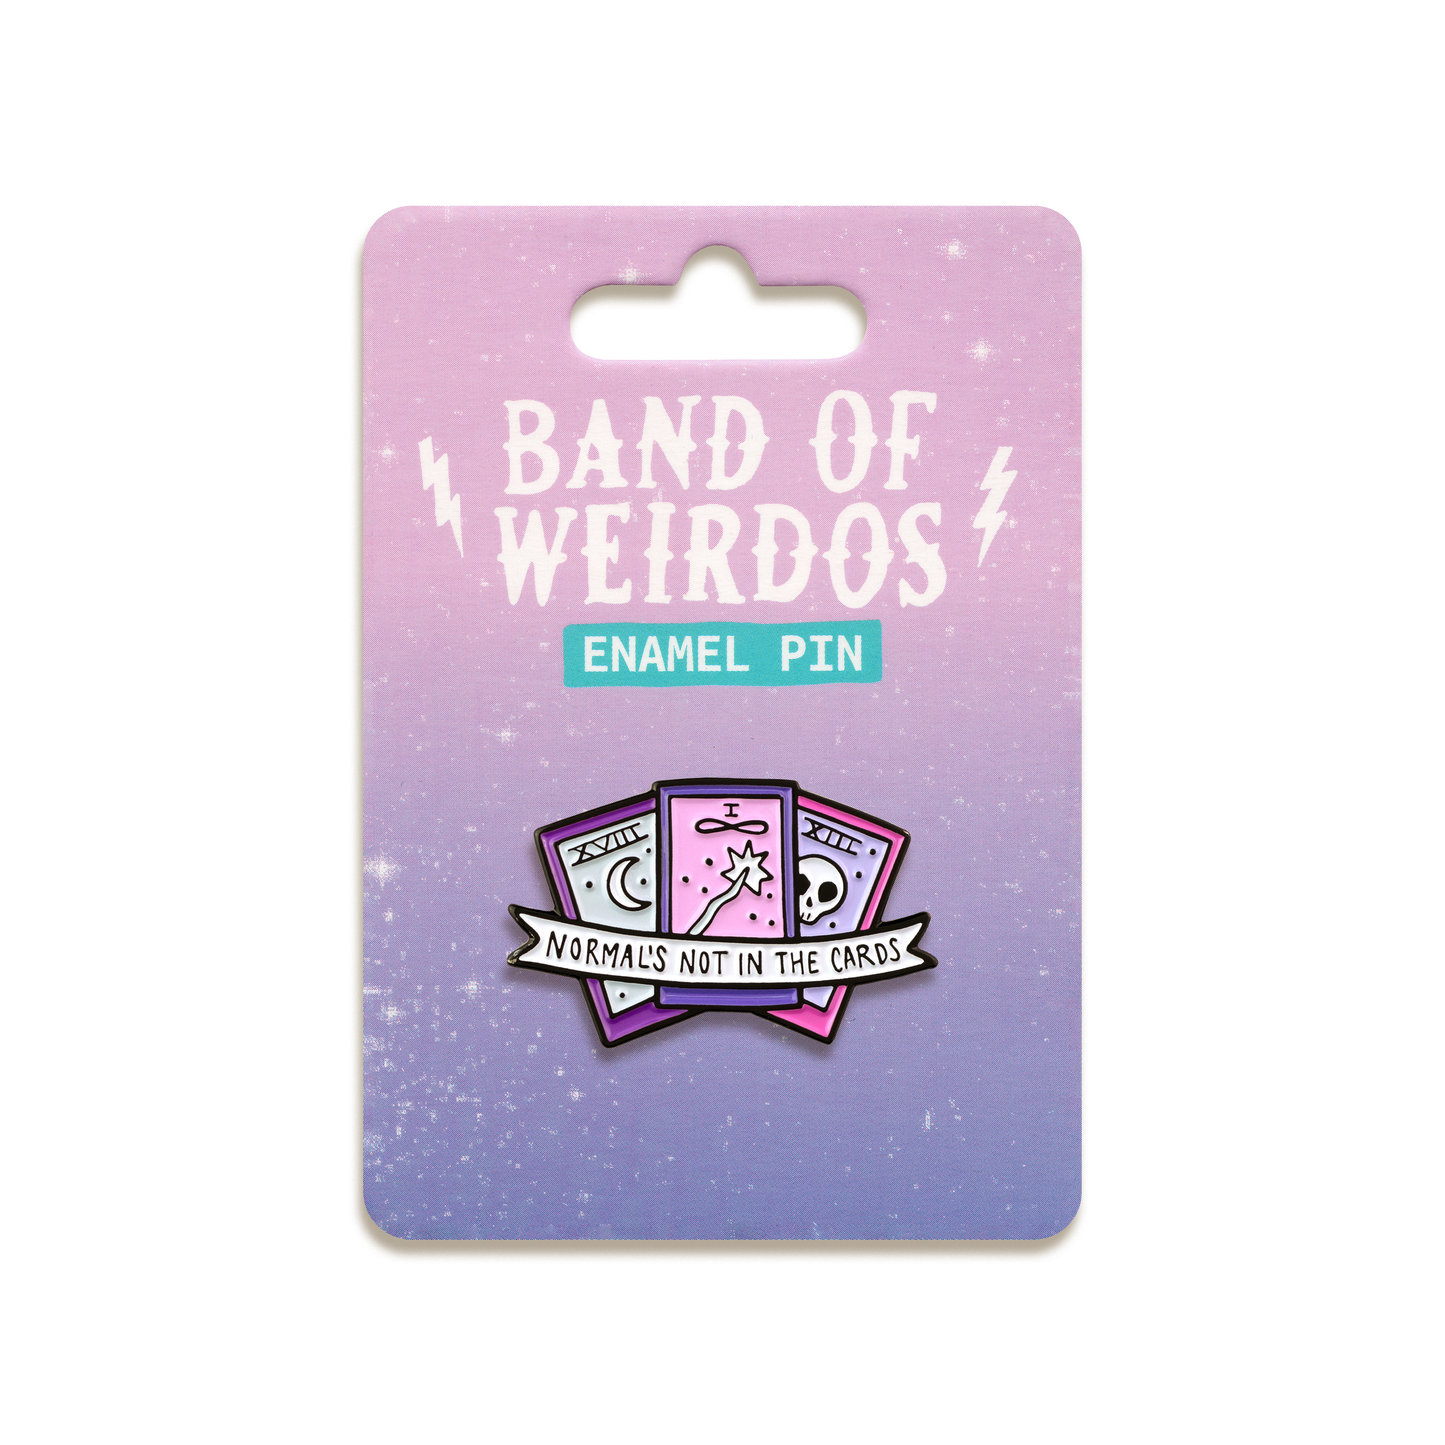 Normal's Not in the Cards Enamel Pin by Band of Weirdos